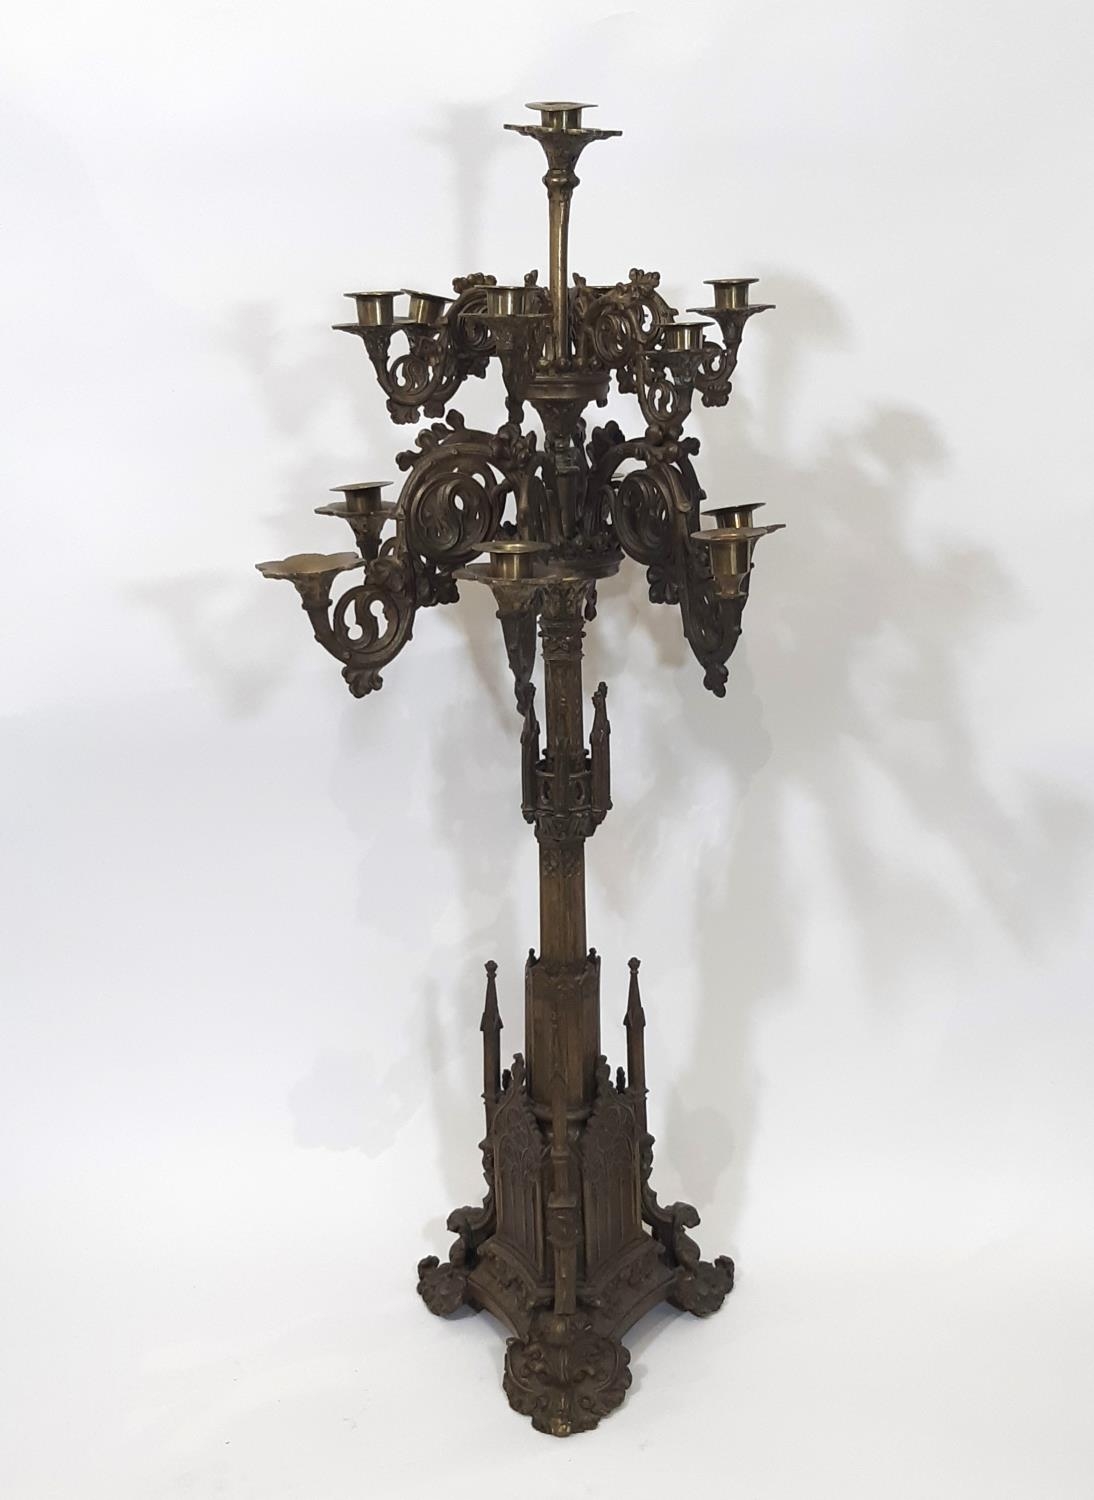 A tall and impressive puginesque 19th century continental gothic thirteen light floor-standing